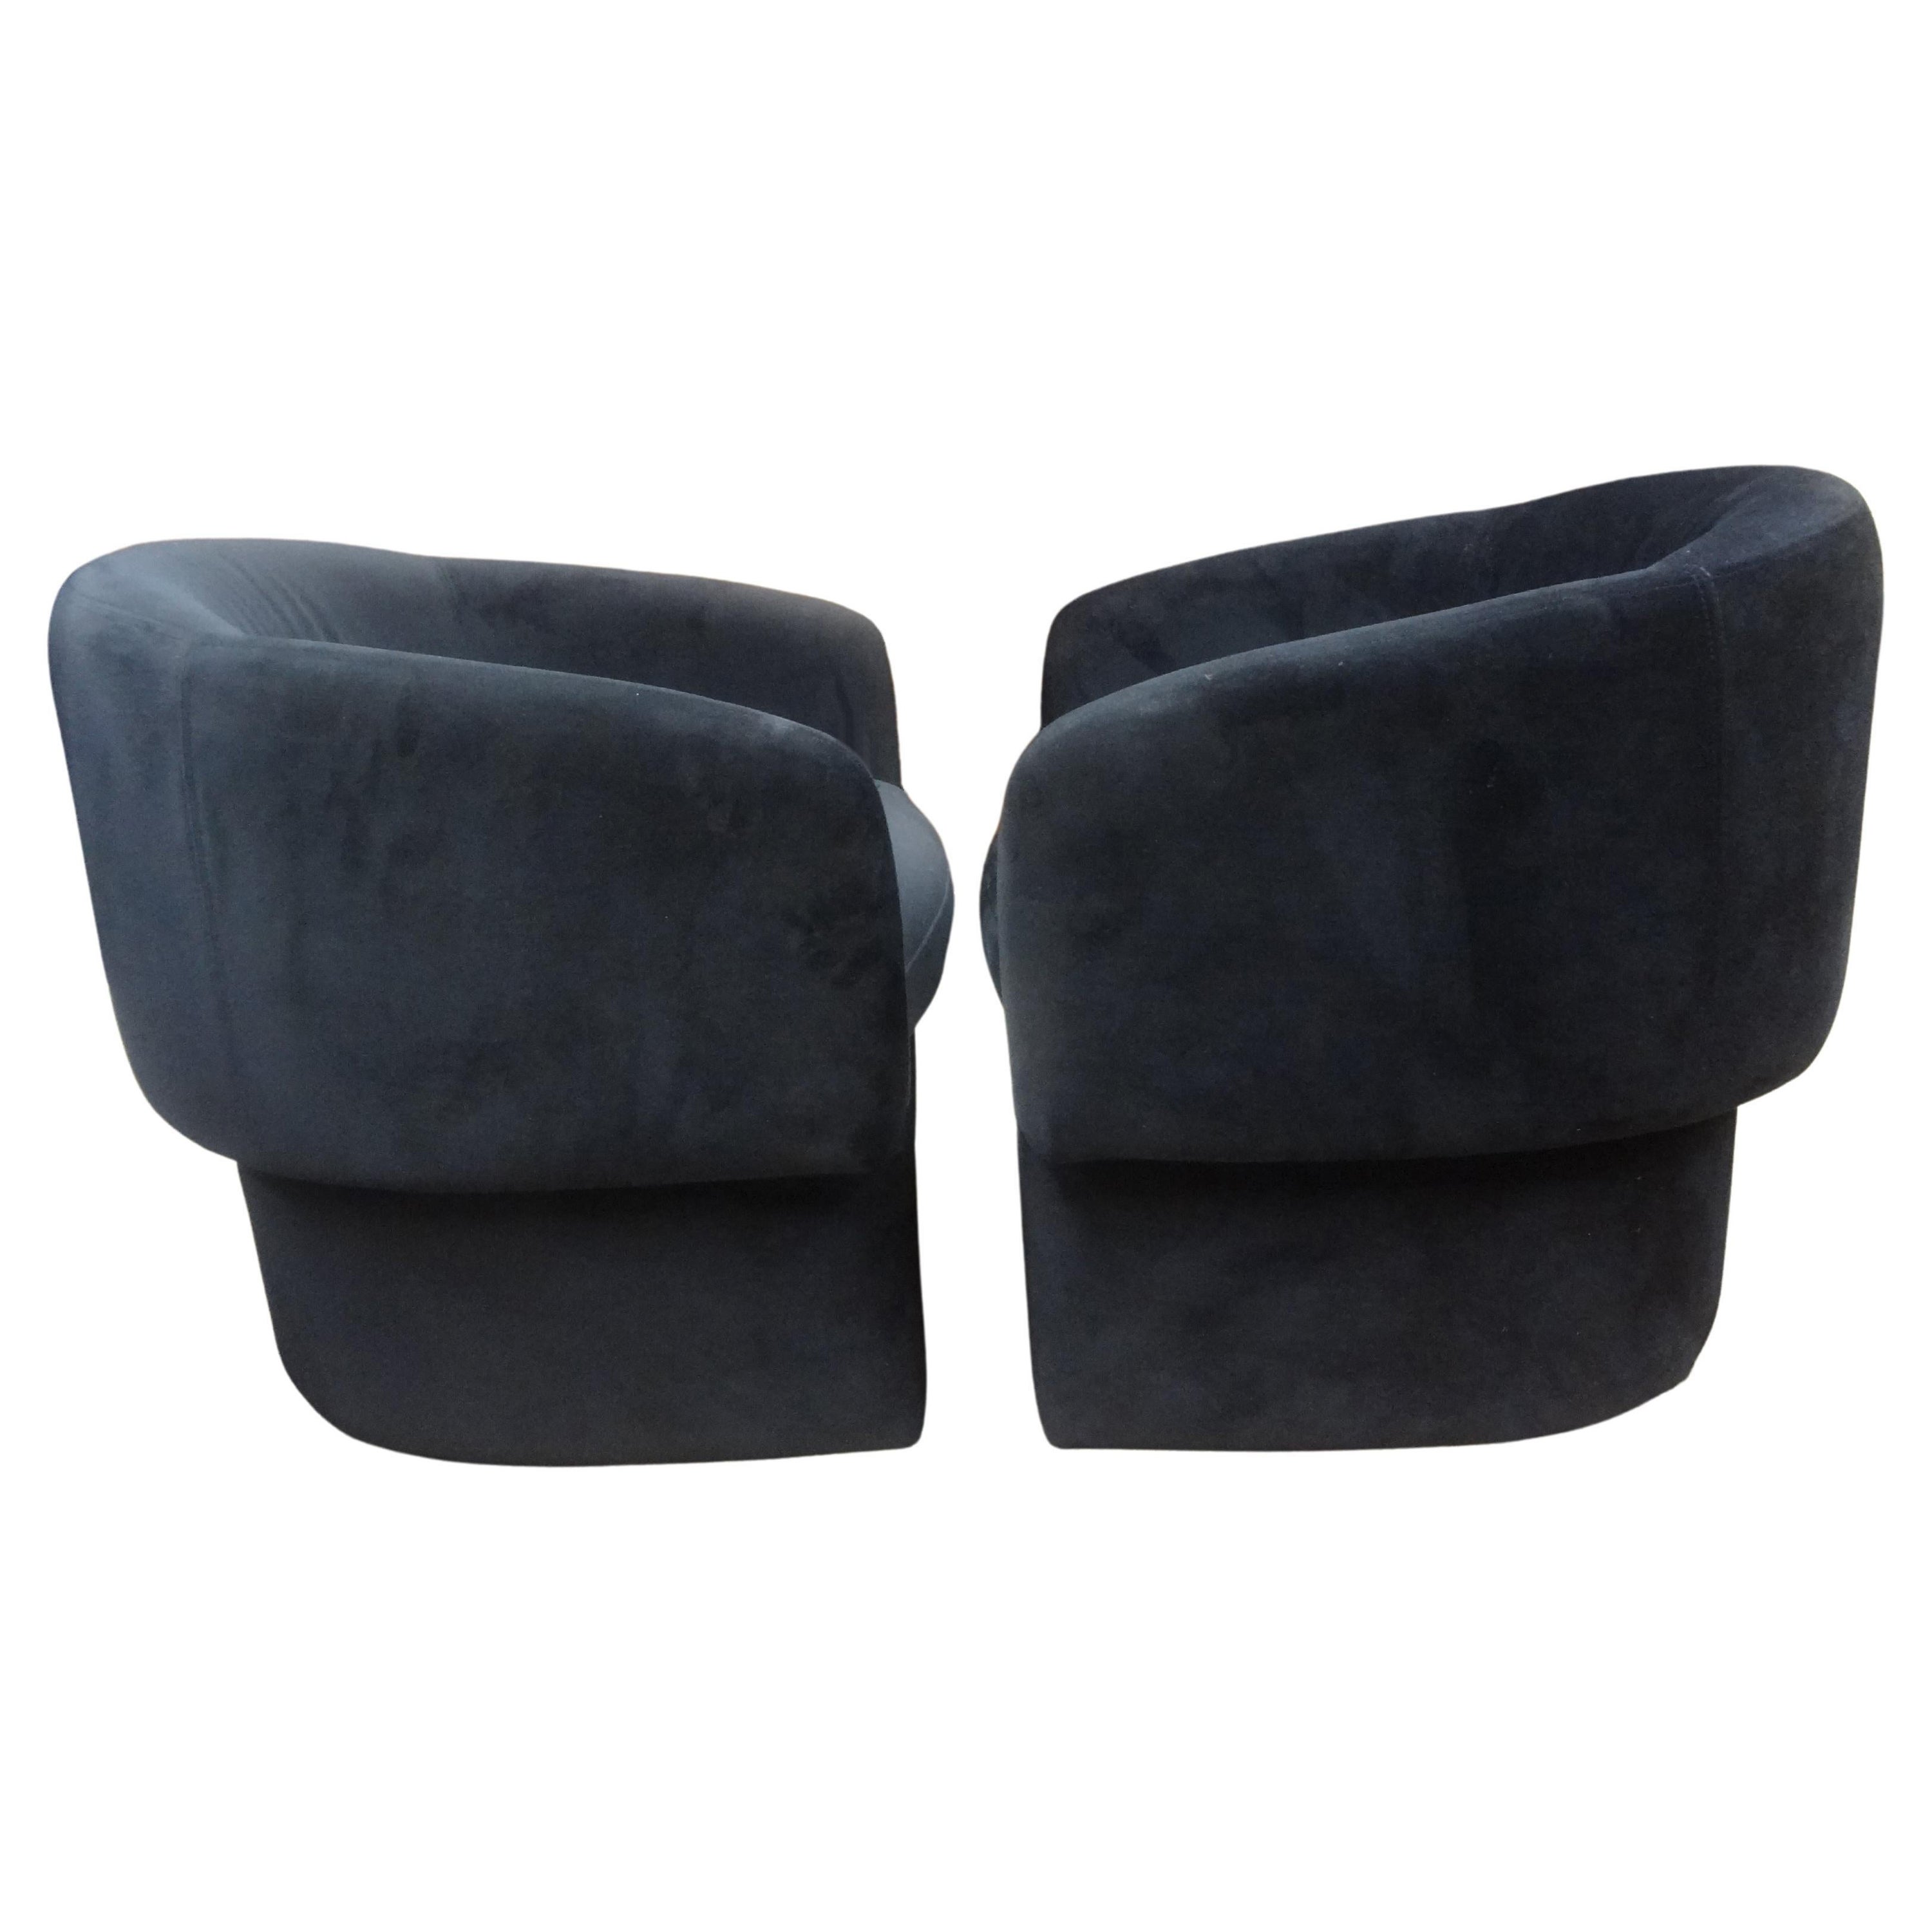 Pair Of Milo Baughman Inspired Postmodern Lounge Chairs On Plinths For Sale